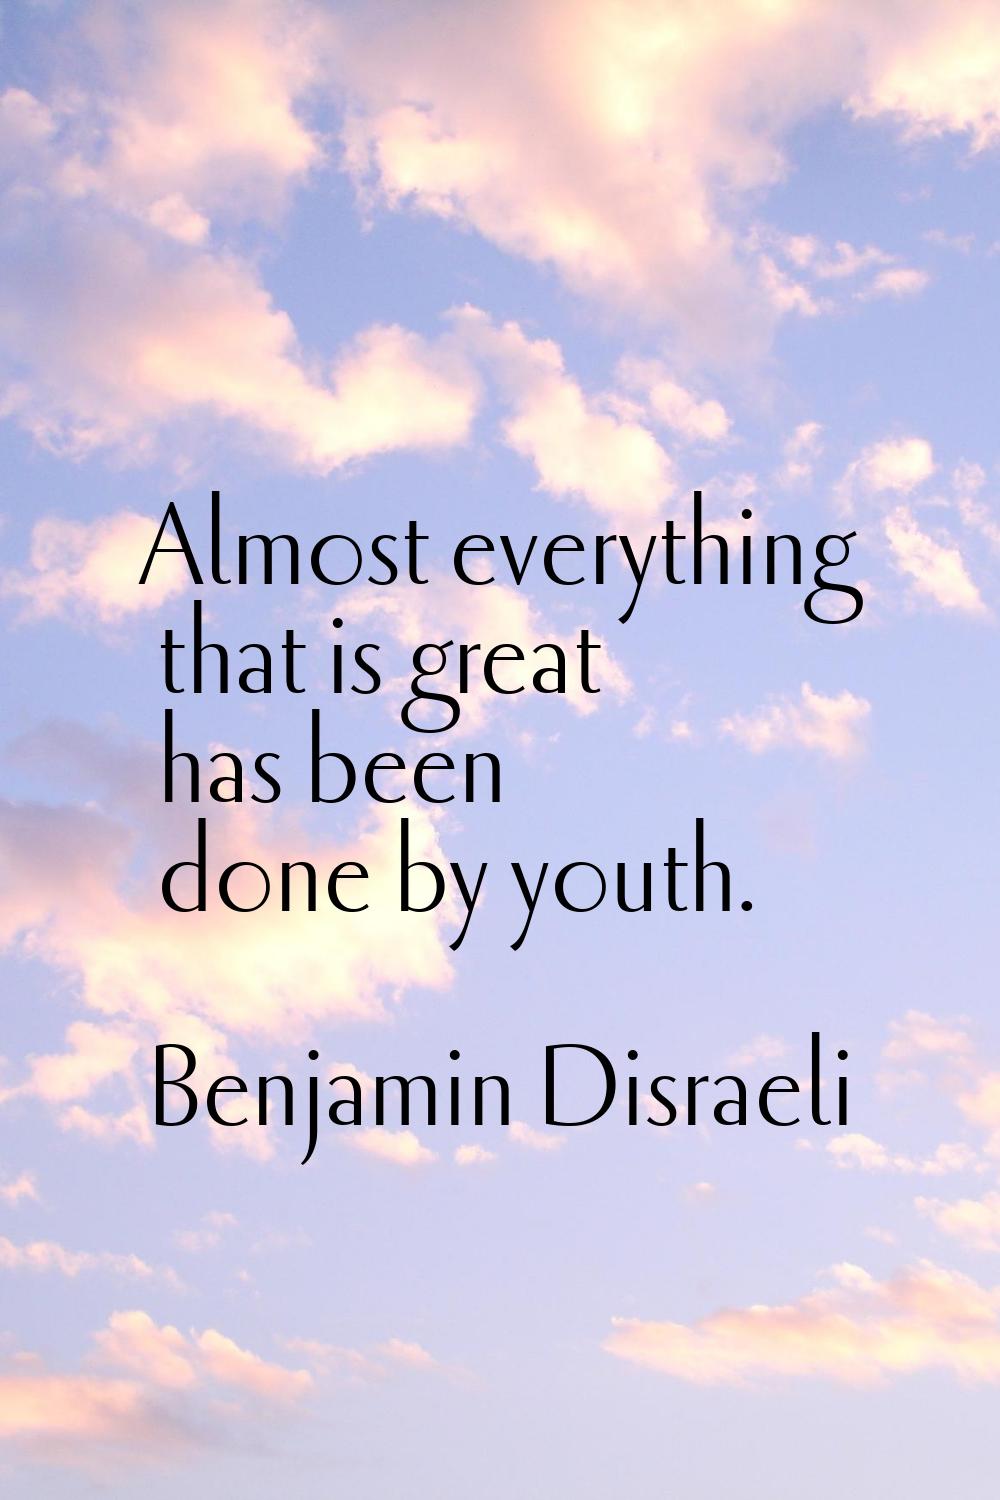 Almost everything that is great has been done by youth.